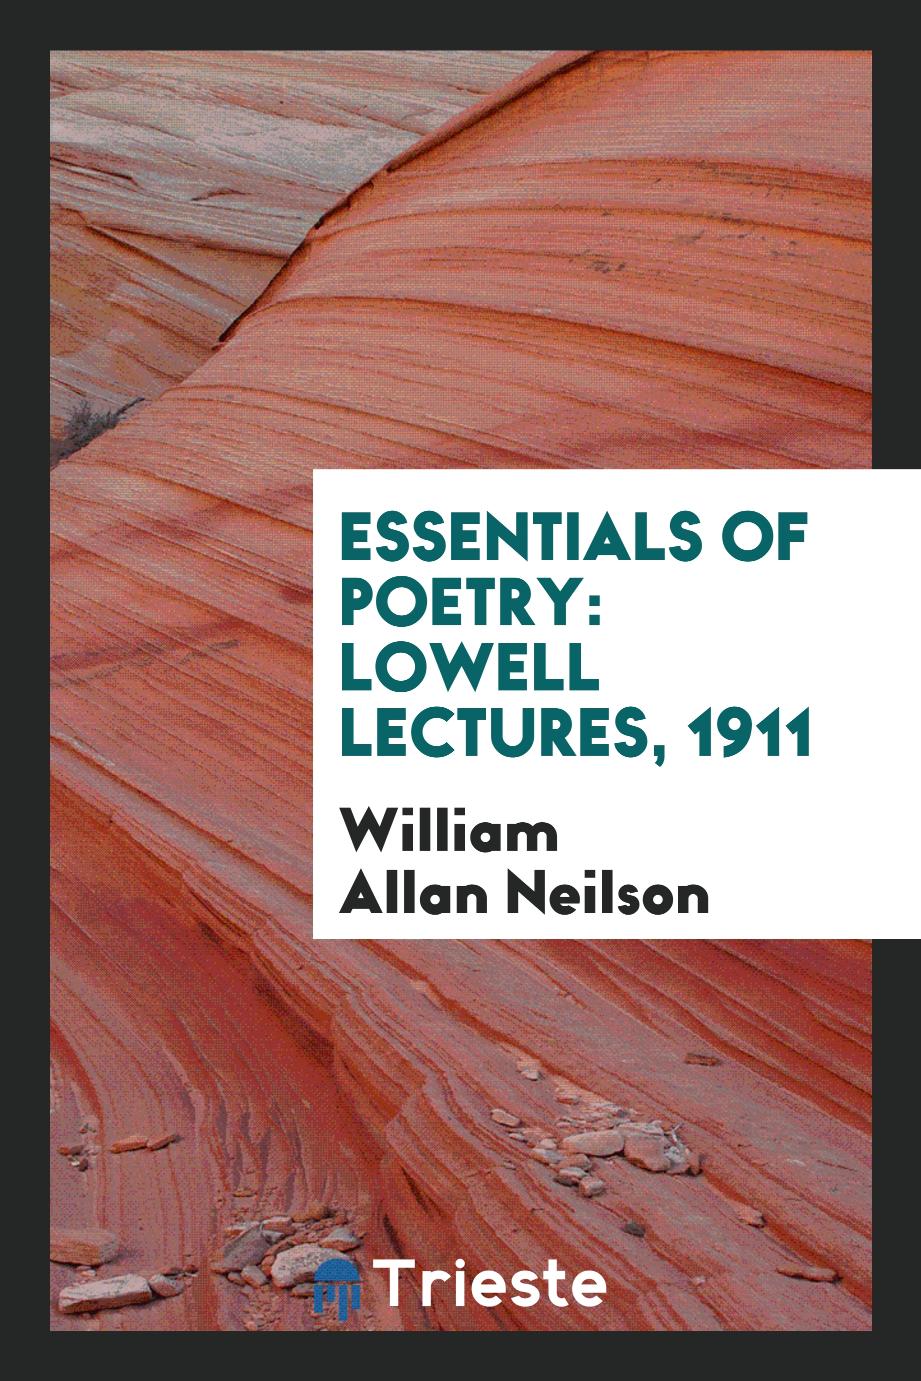 William Allan  Neilson - Essentials of Poetry: Lowell Lectures, 1911